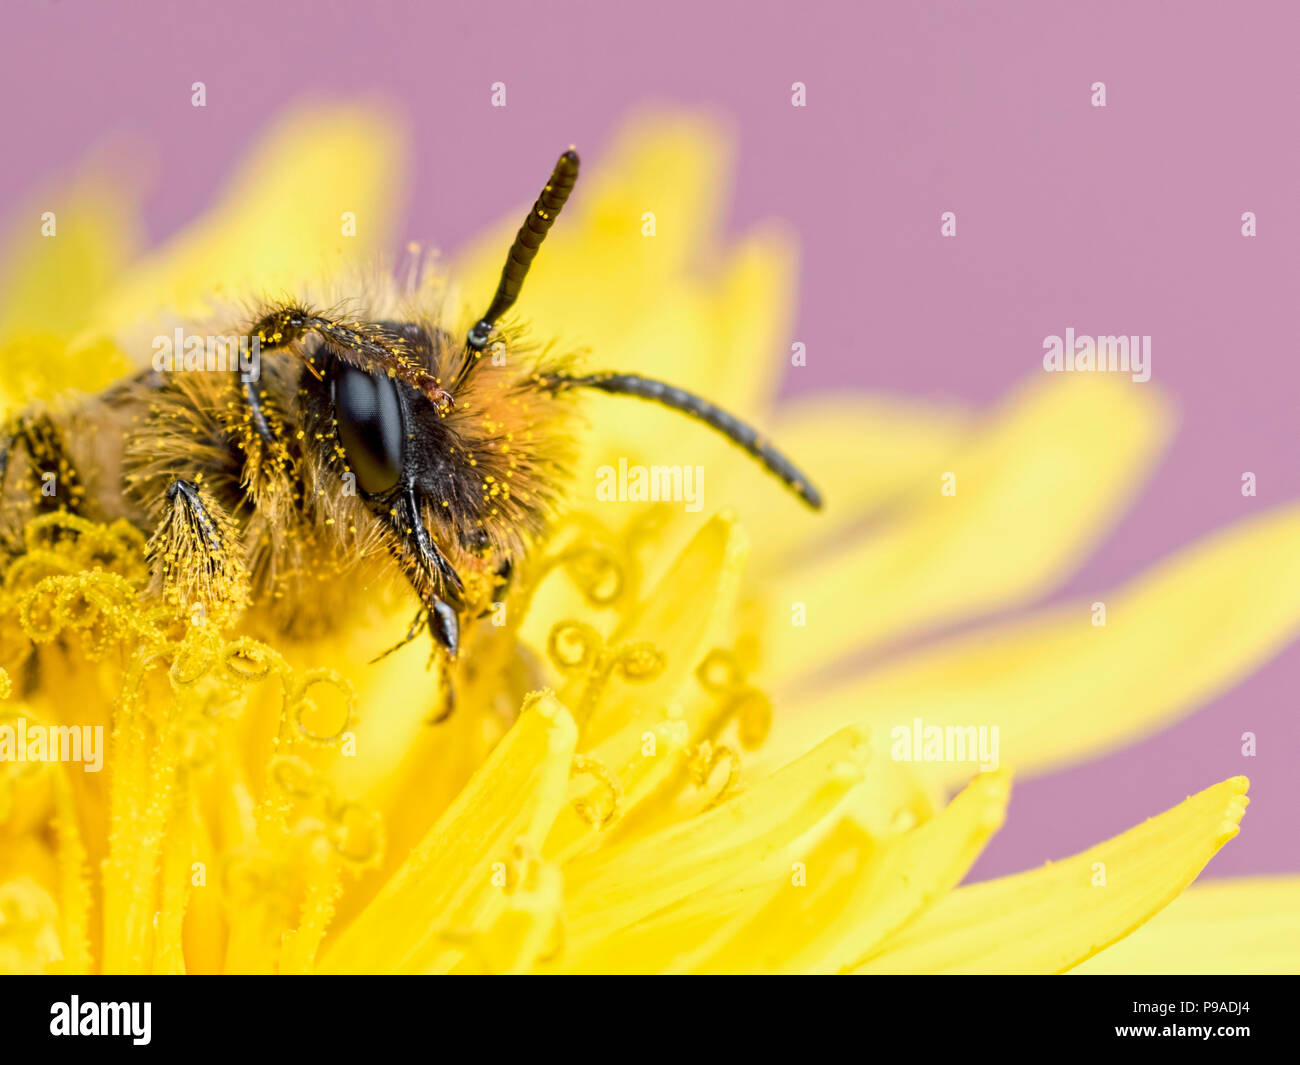 A Solitary Bee saluting to the camera Stock Photo